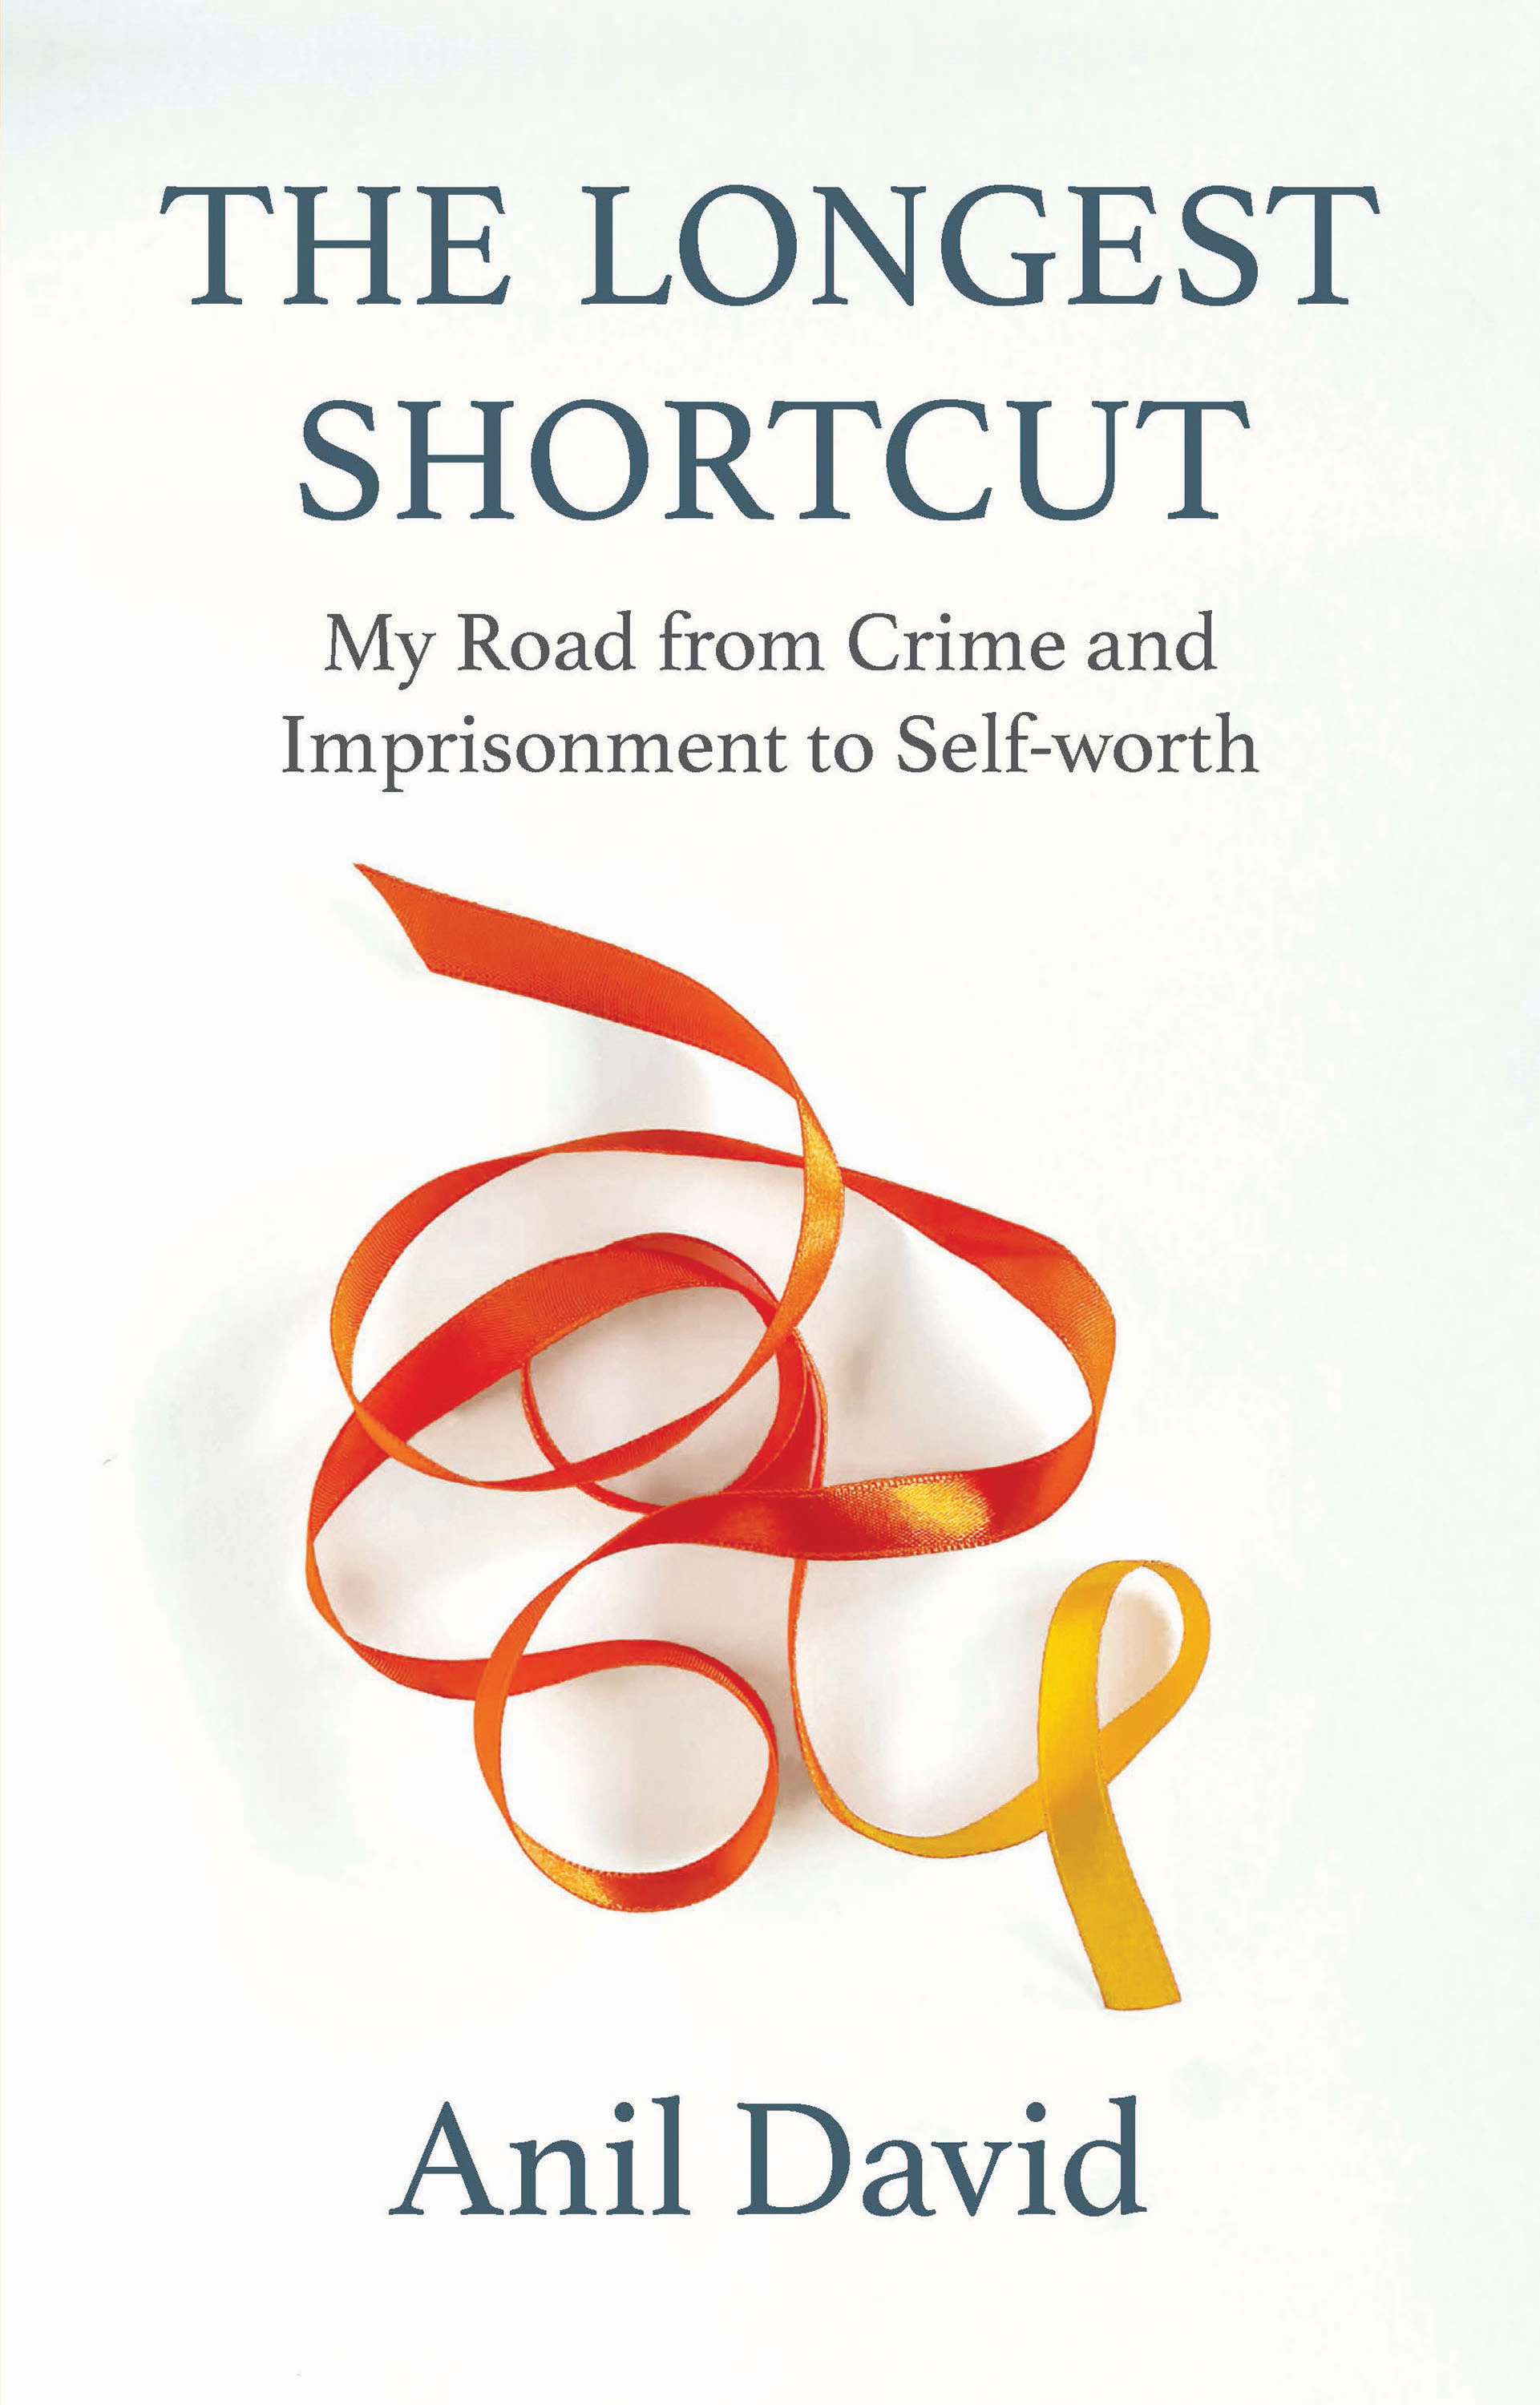 The Longest Shortcut: My Road from Crime and Imprisonment to Self-worth